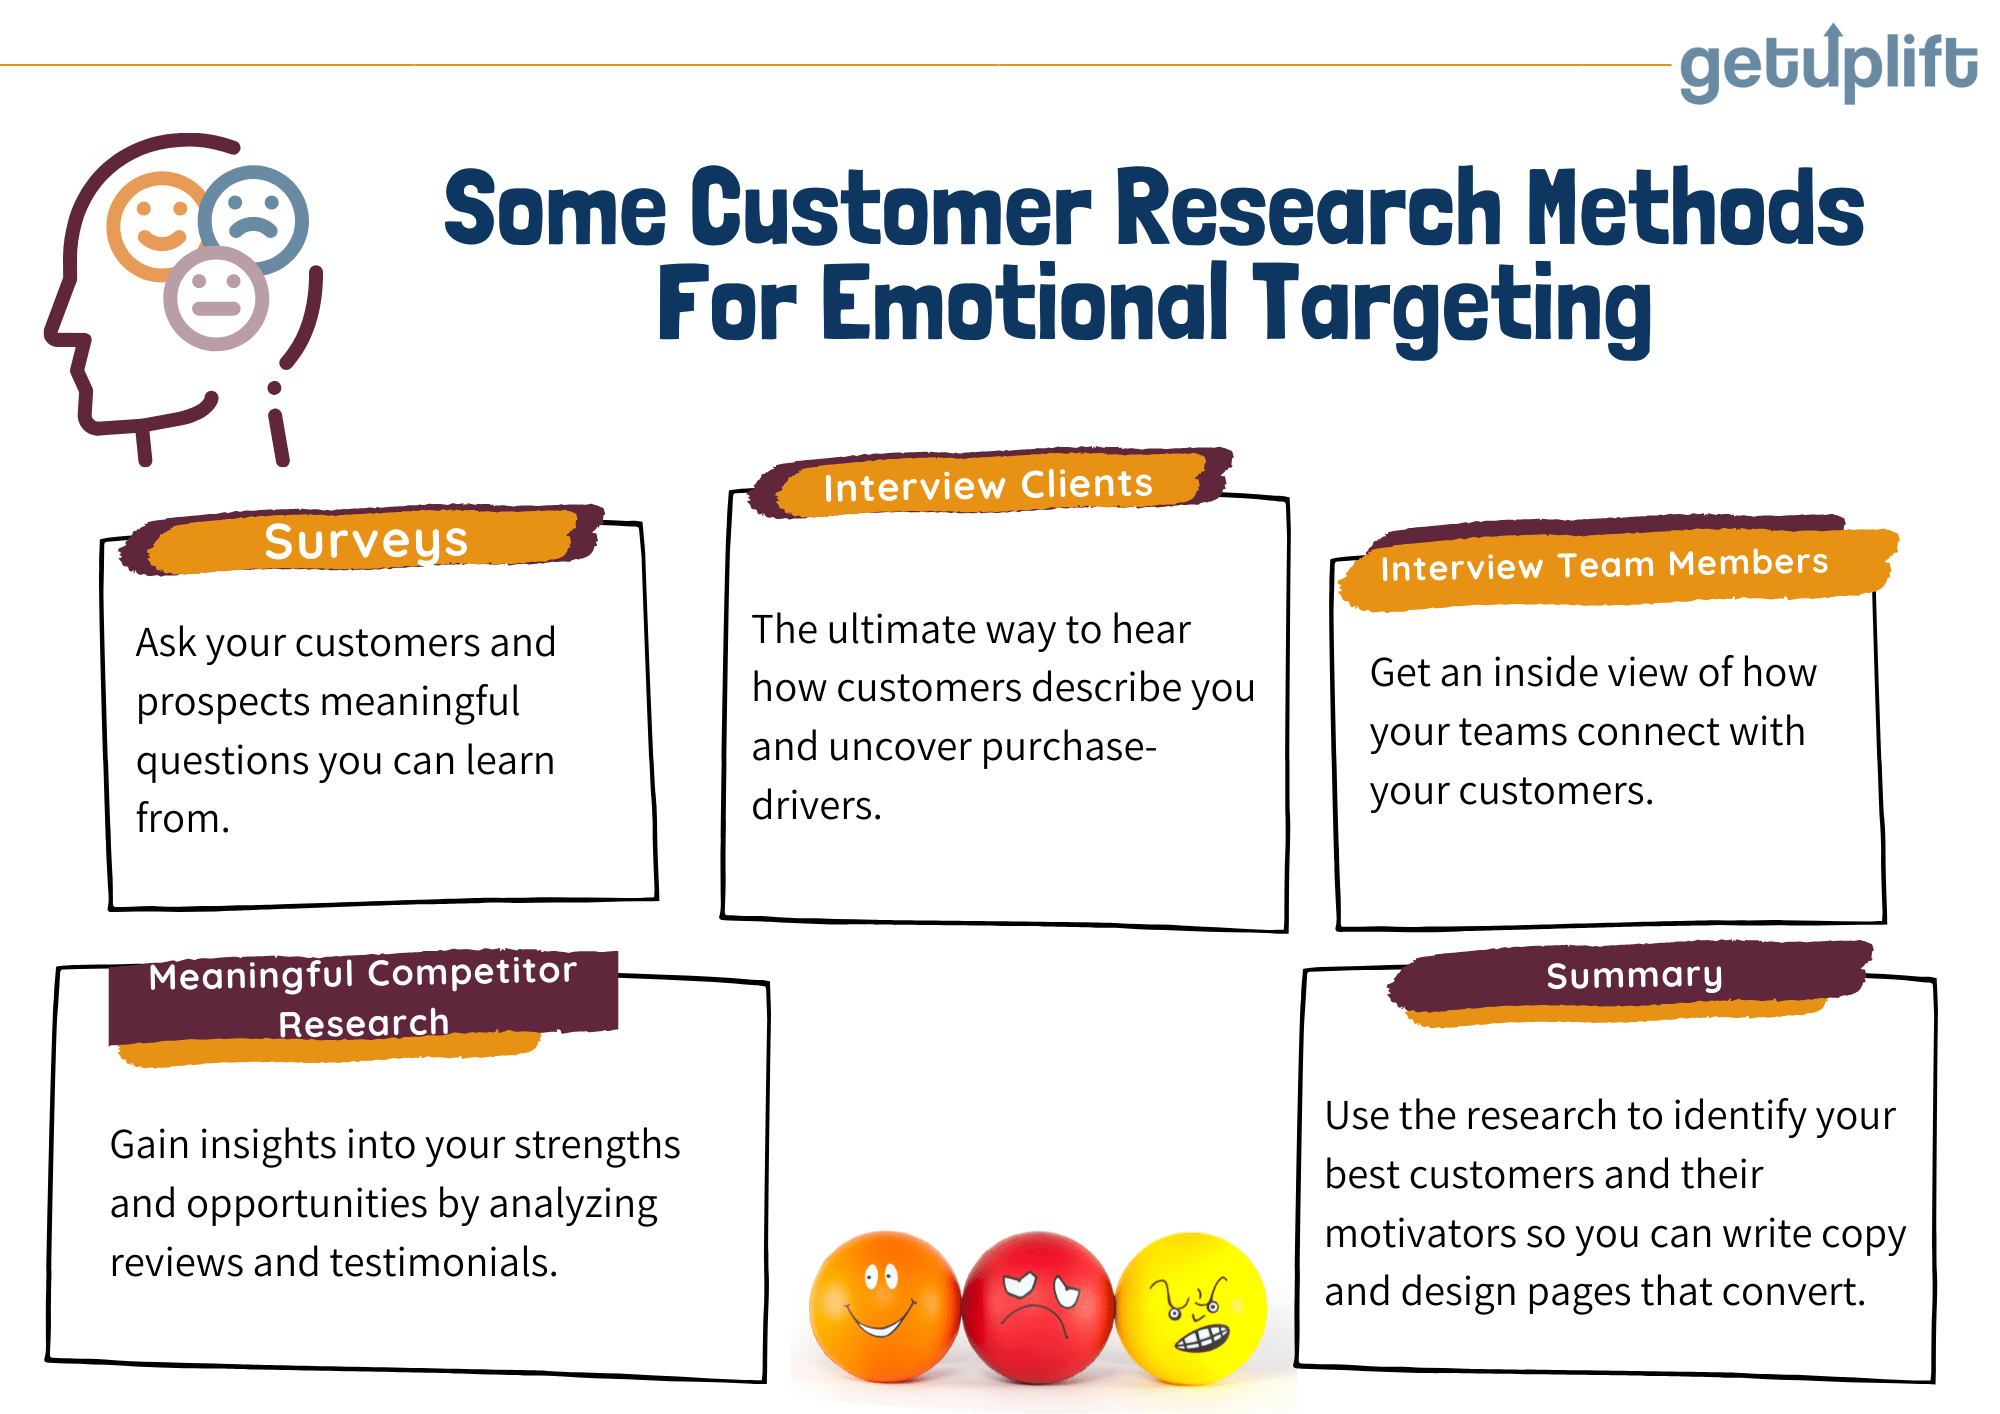 Some customer research methods that help with emotional marketing